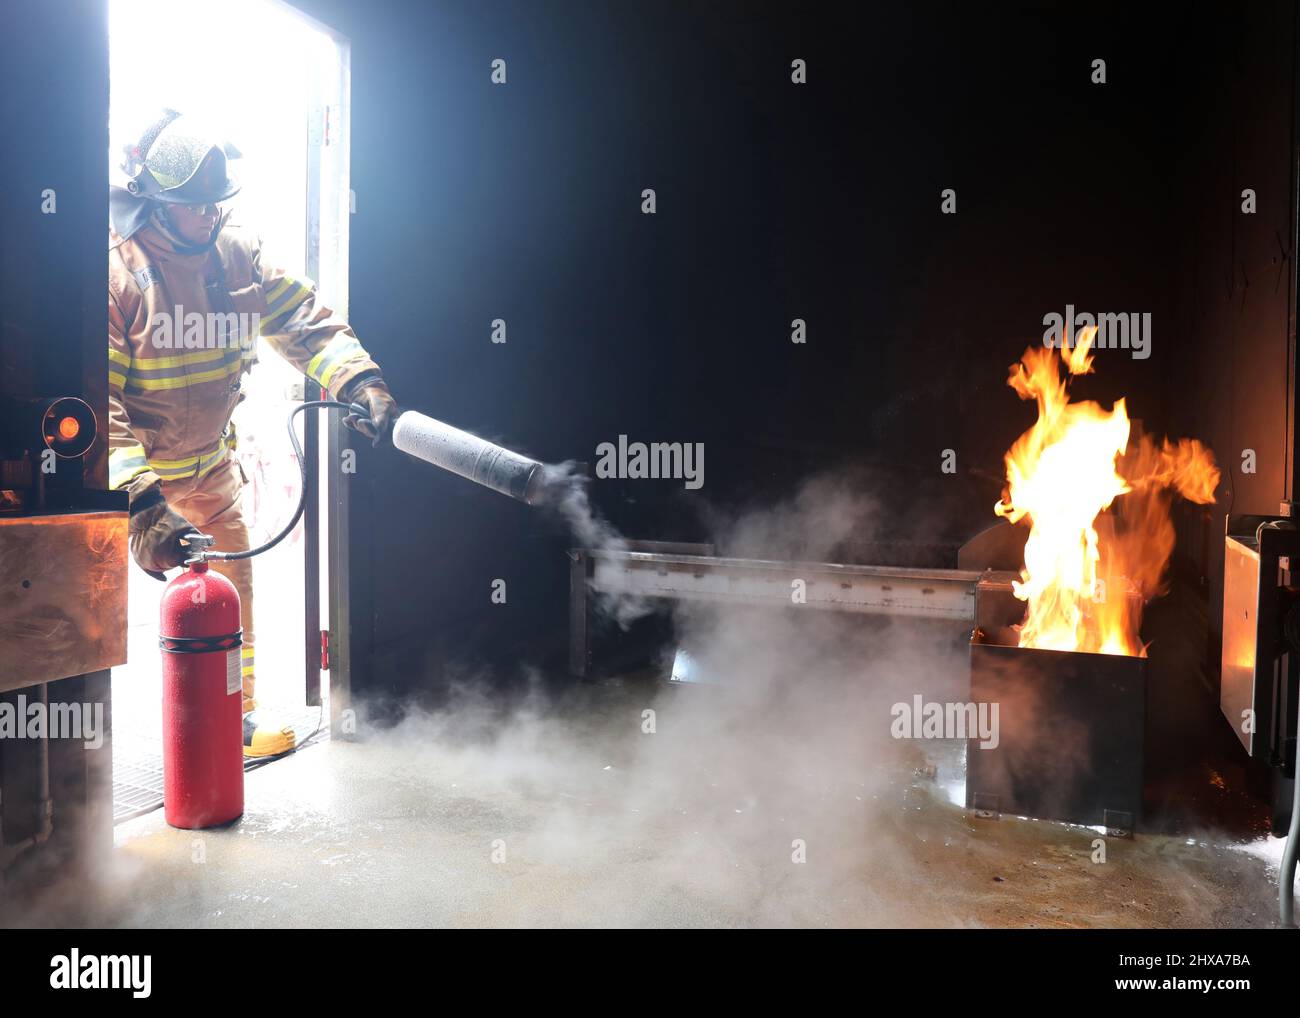 220223-N-OH262-0021--FORT EUSTIS, Va. (February 23, 2022)--A newly hired Civil Service Mariner (CIVMAR) uses a CO2 fire extinguisher to put out a simulated trashcan fire at the Military Sealift Command Training Center East on Joint Base Langley-Fort Eustis, Virginia, Feb. 23. The training was part of the MSC Basic Training Damage Control curriculum, which must be successfully completed prior to sailing in MSC's fleet of ships. (U.S. Navy photo by Bill Mesta/released) Stock Photo